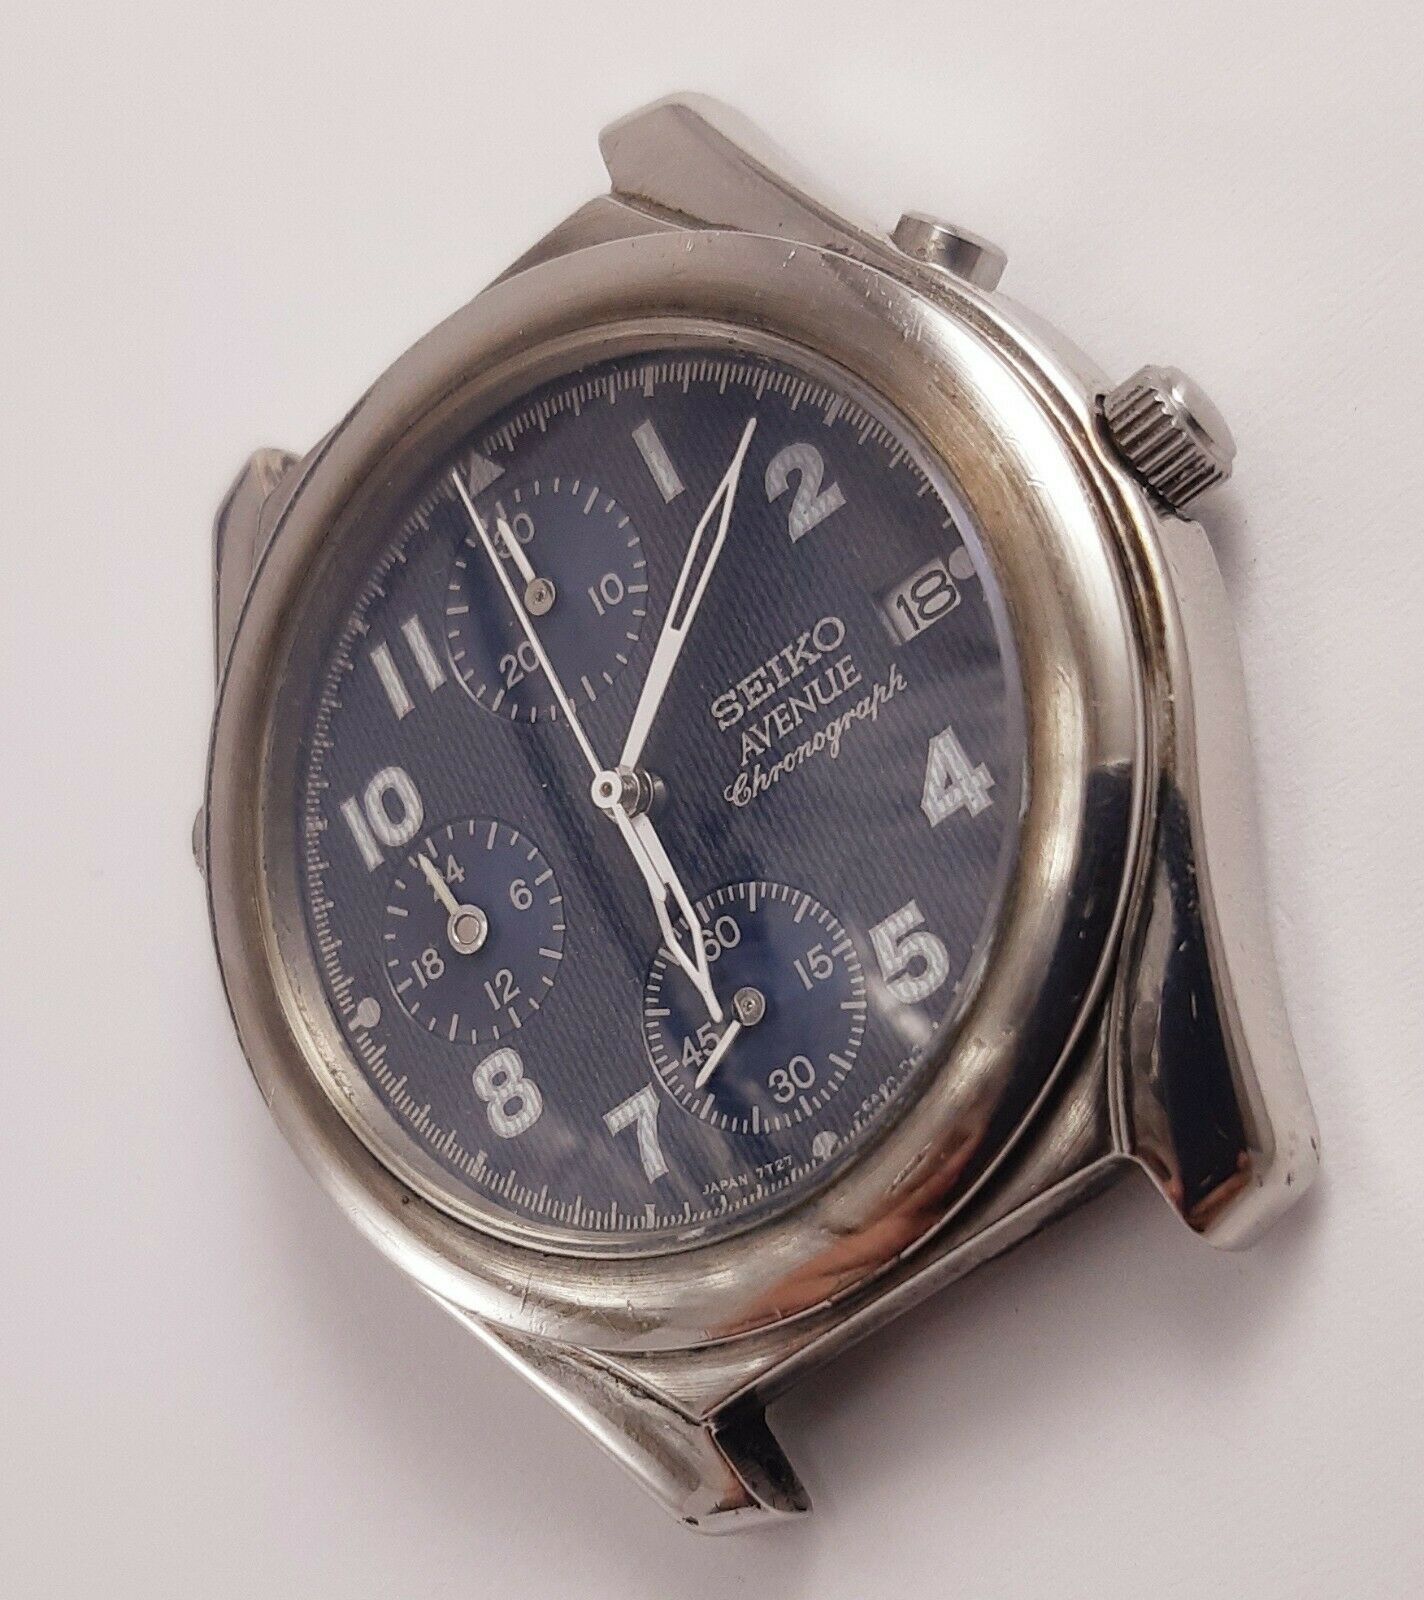 Seiko Avenue chronograph 7t27-6a60 - partial working | WatchCharts